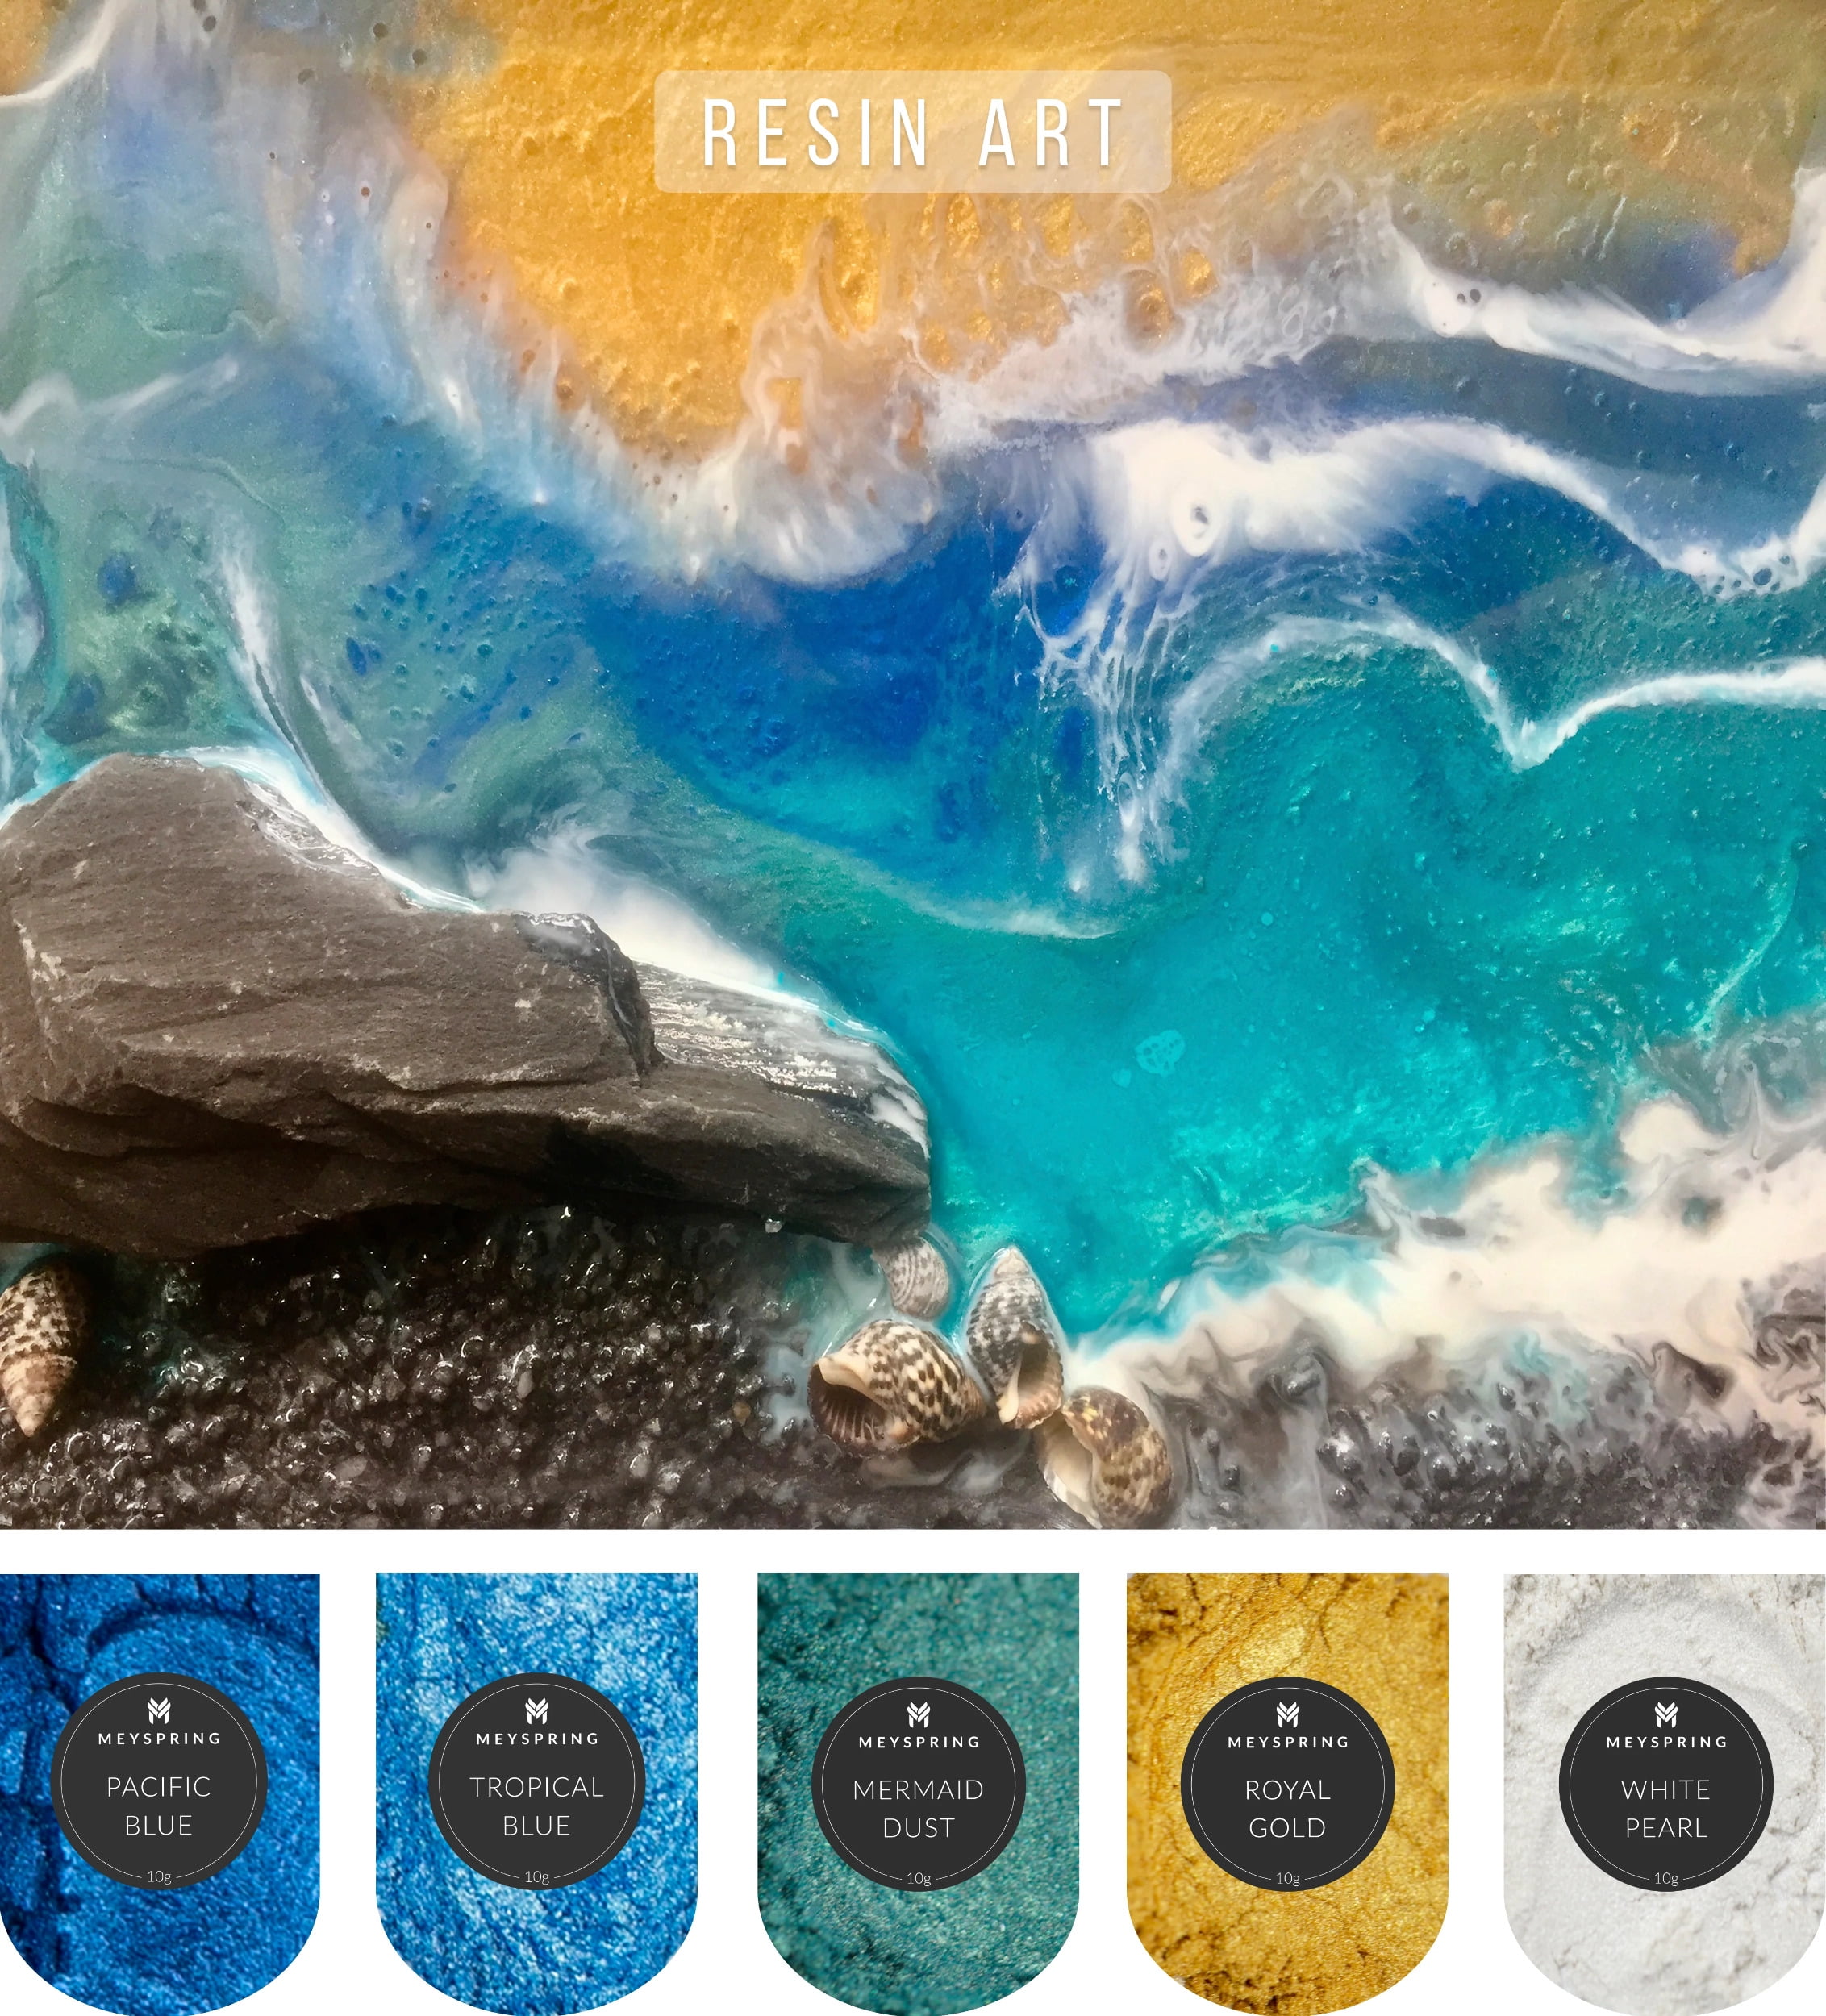 MEYSPRING Turquoise Blue Mica Powder for Resin Ocean Art & Woodworking -  Beautiful, vibrant pigment! 